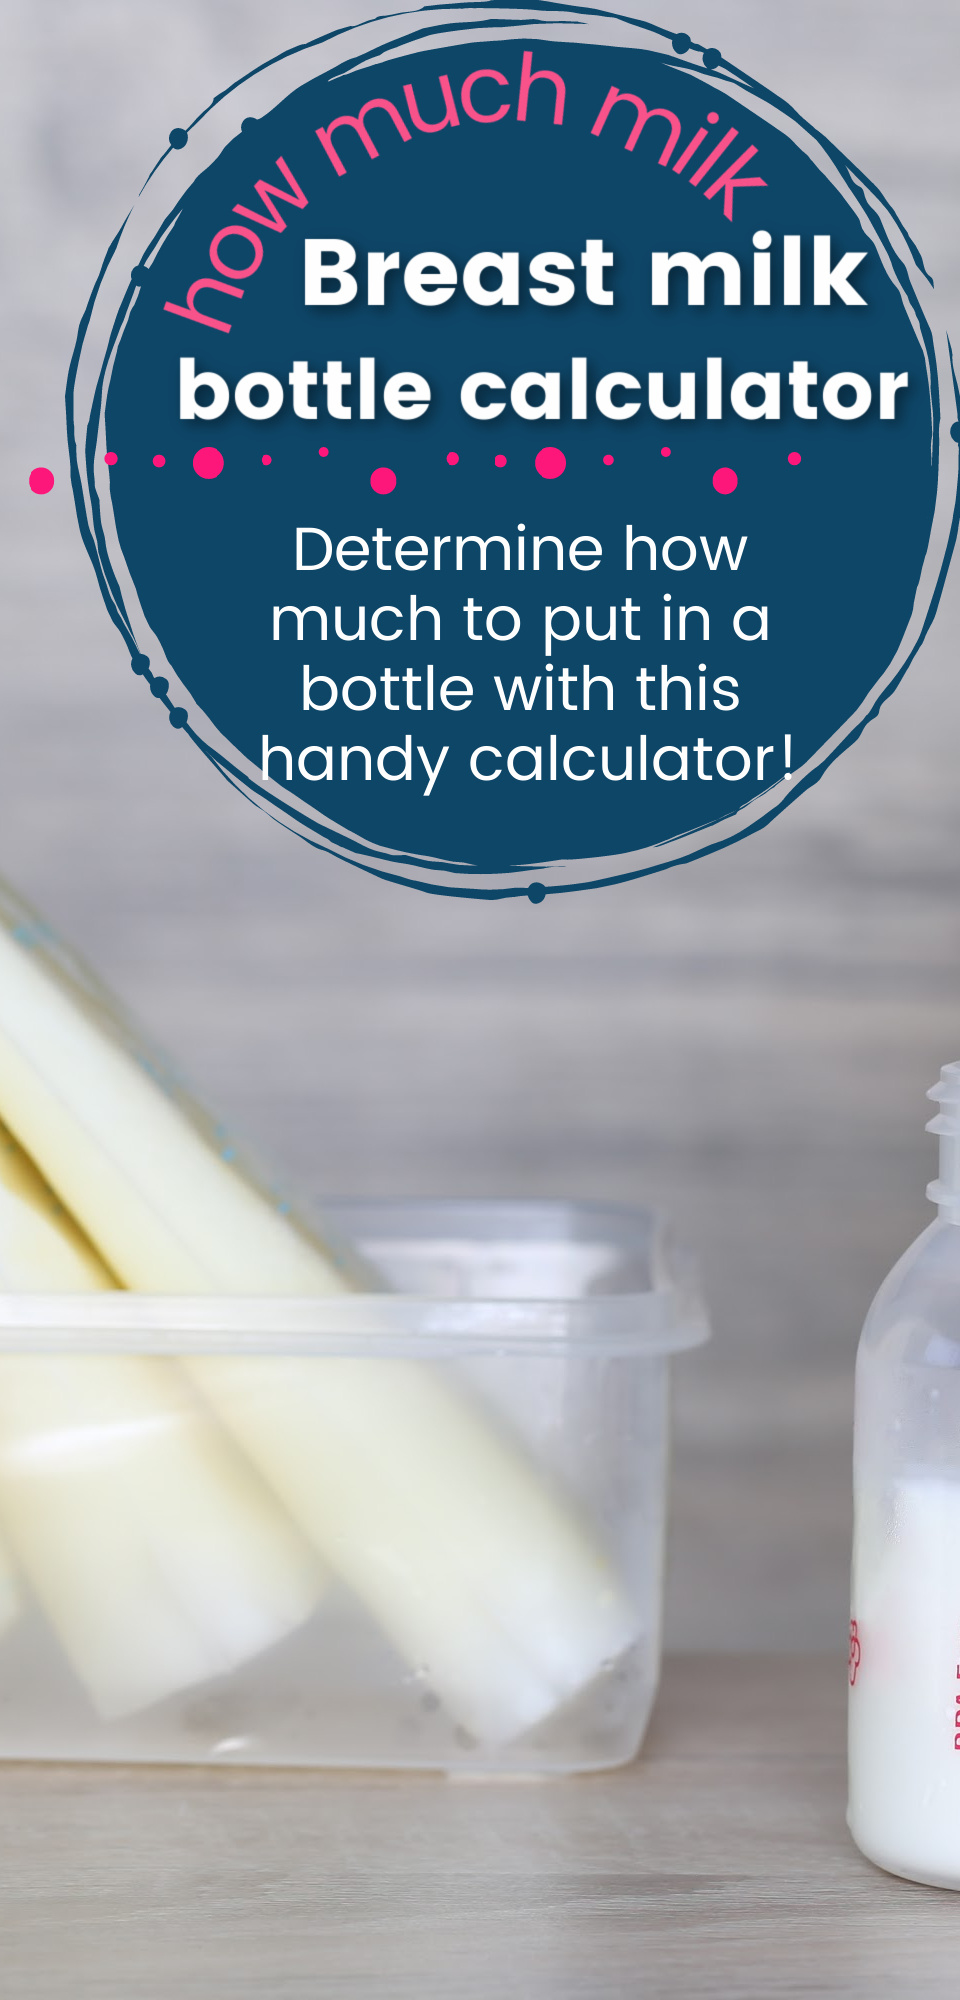 Not sure how much breast milk to put in a bottle? This handy bottle calculator can help you determine where to start!